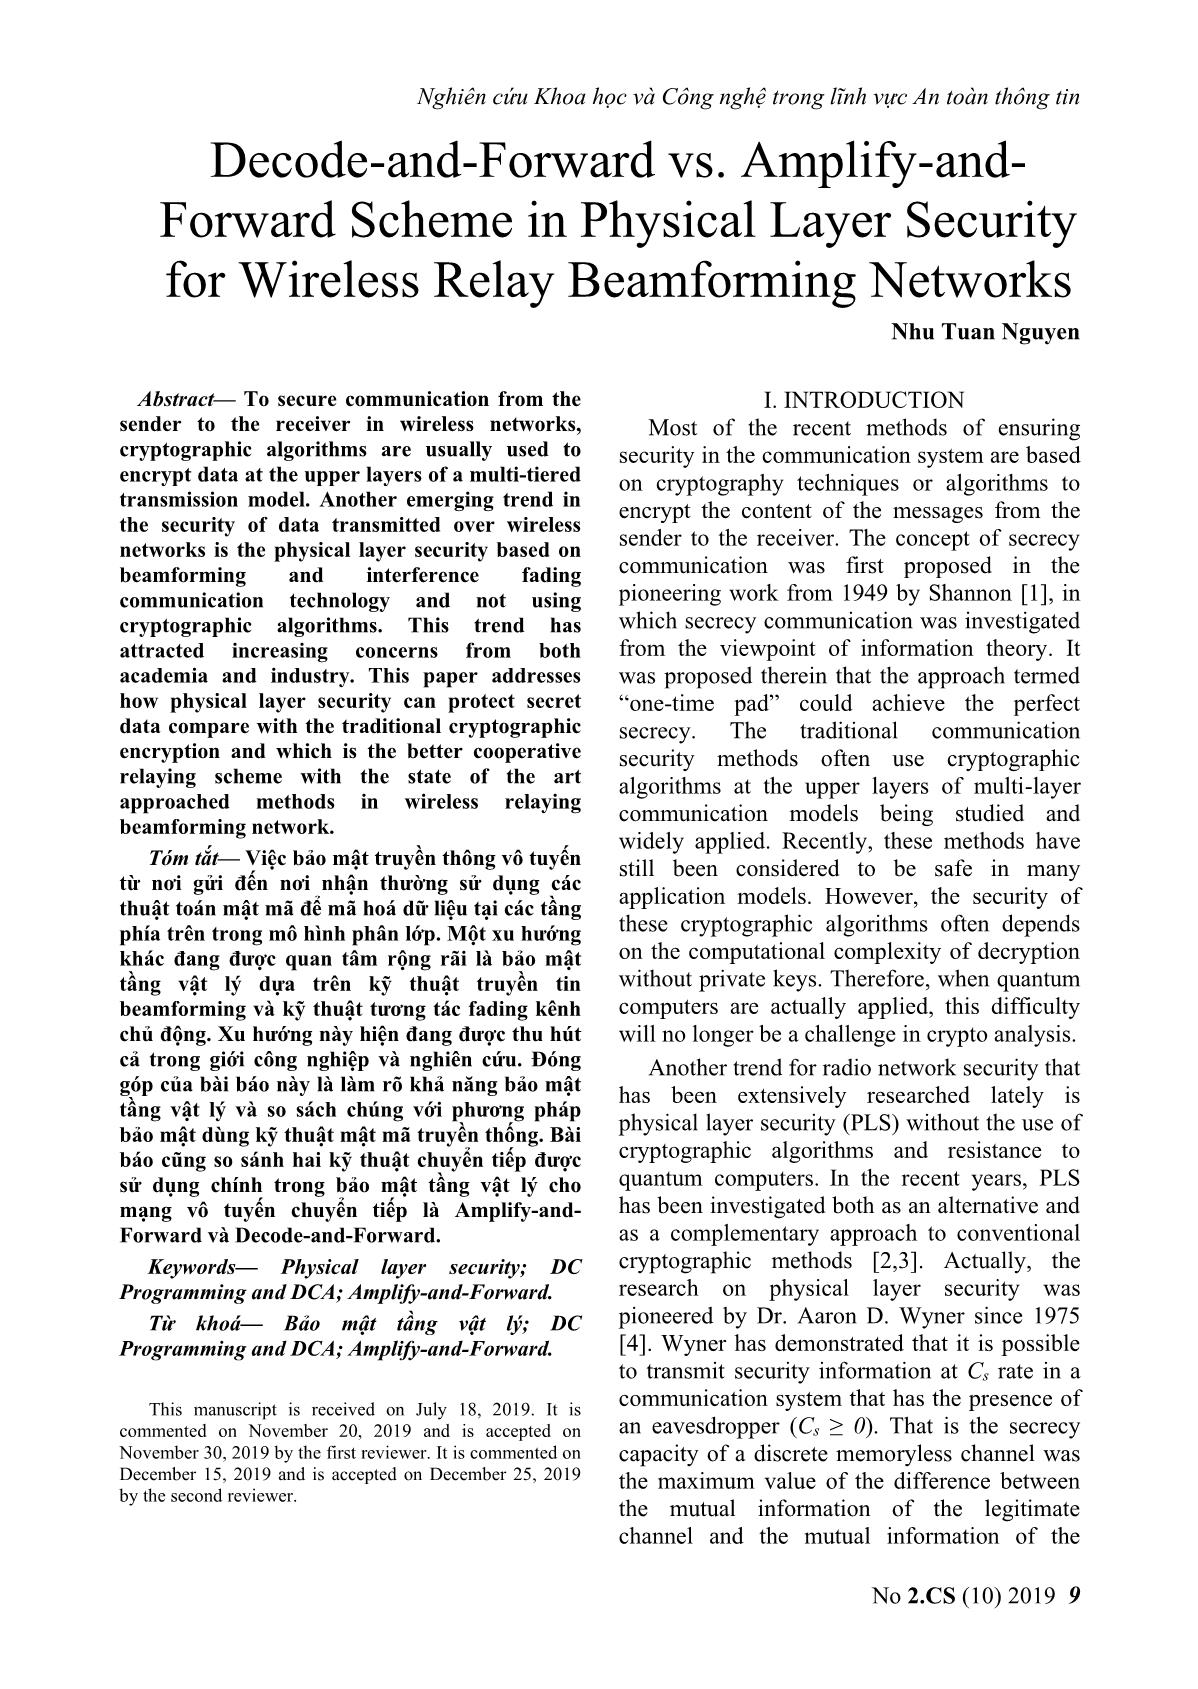 Decode - And-forward vs. amplify - andforward scheme in physical layer security for wireless relay beamforming networks trang 1